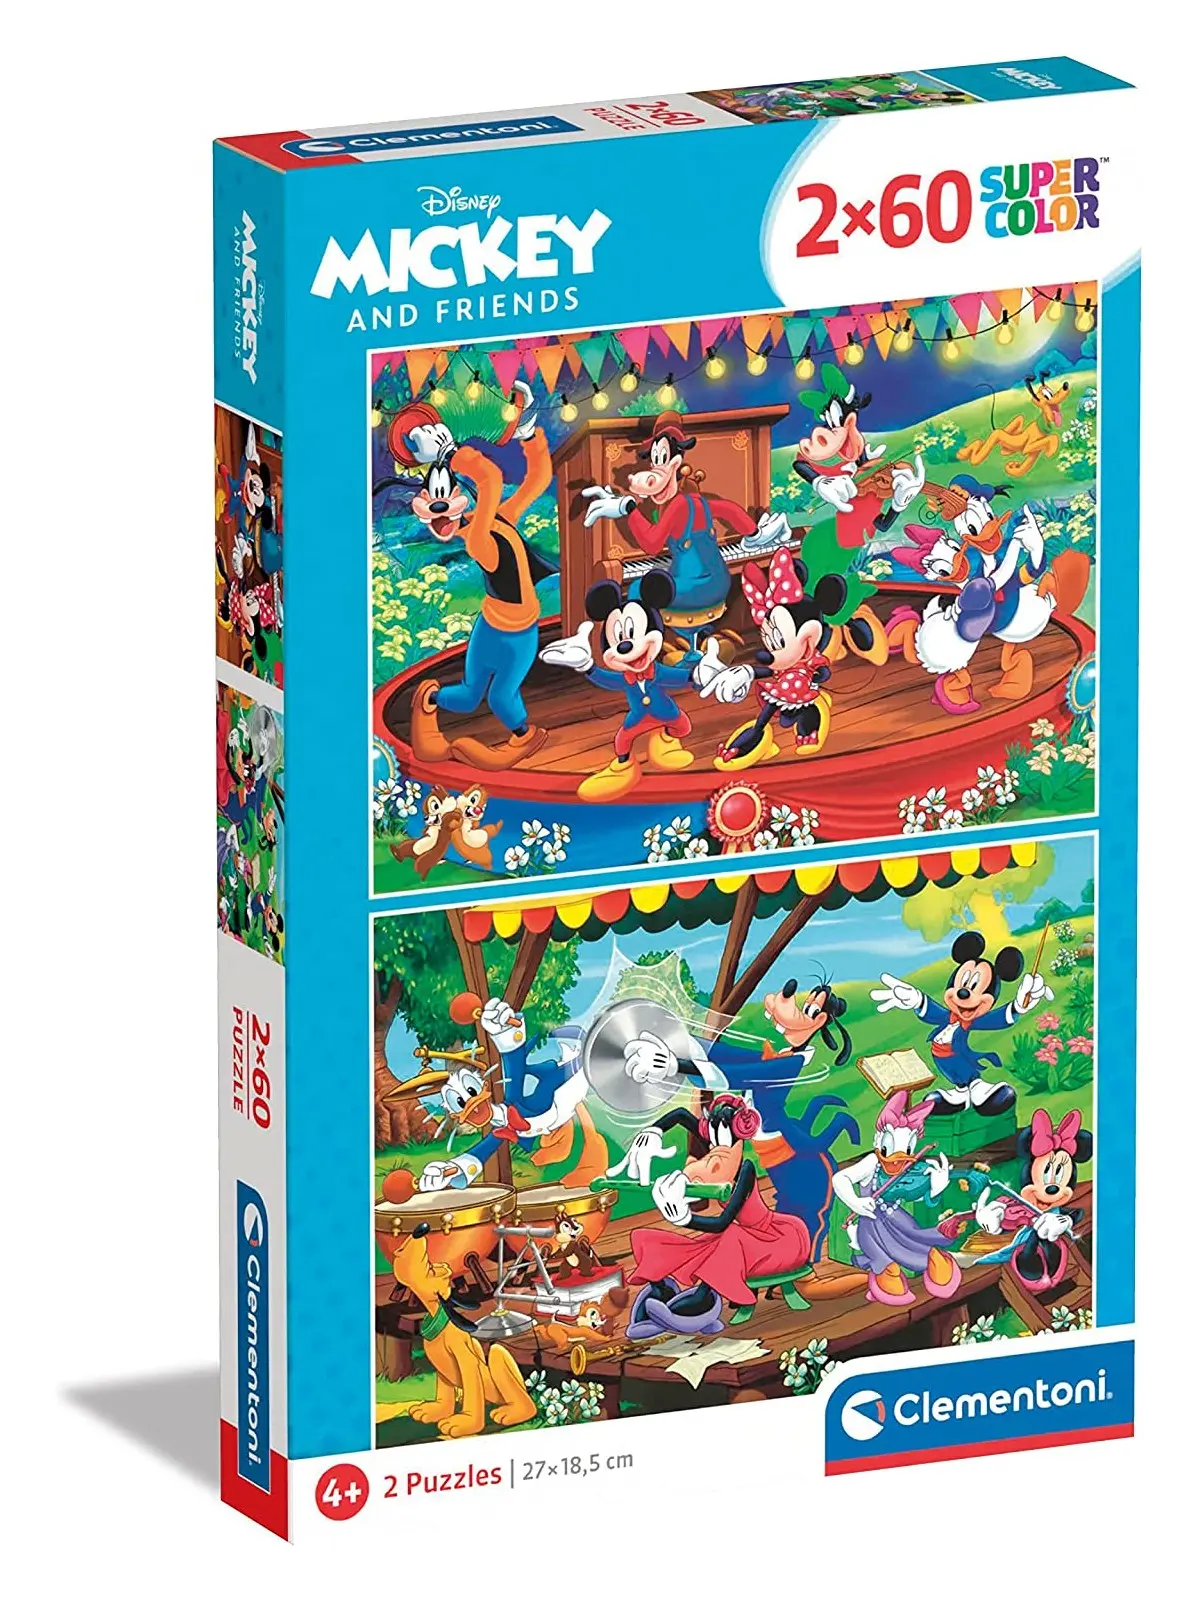 Super Color Puzzle Mickey And Friends 2x60 pcs